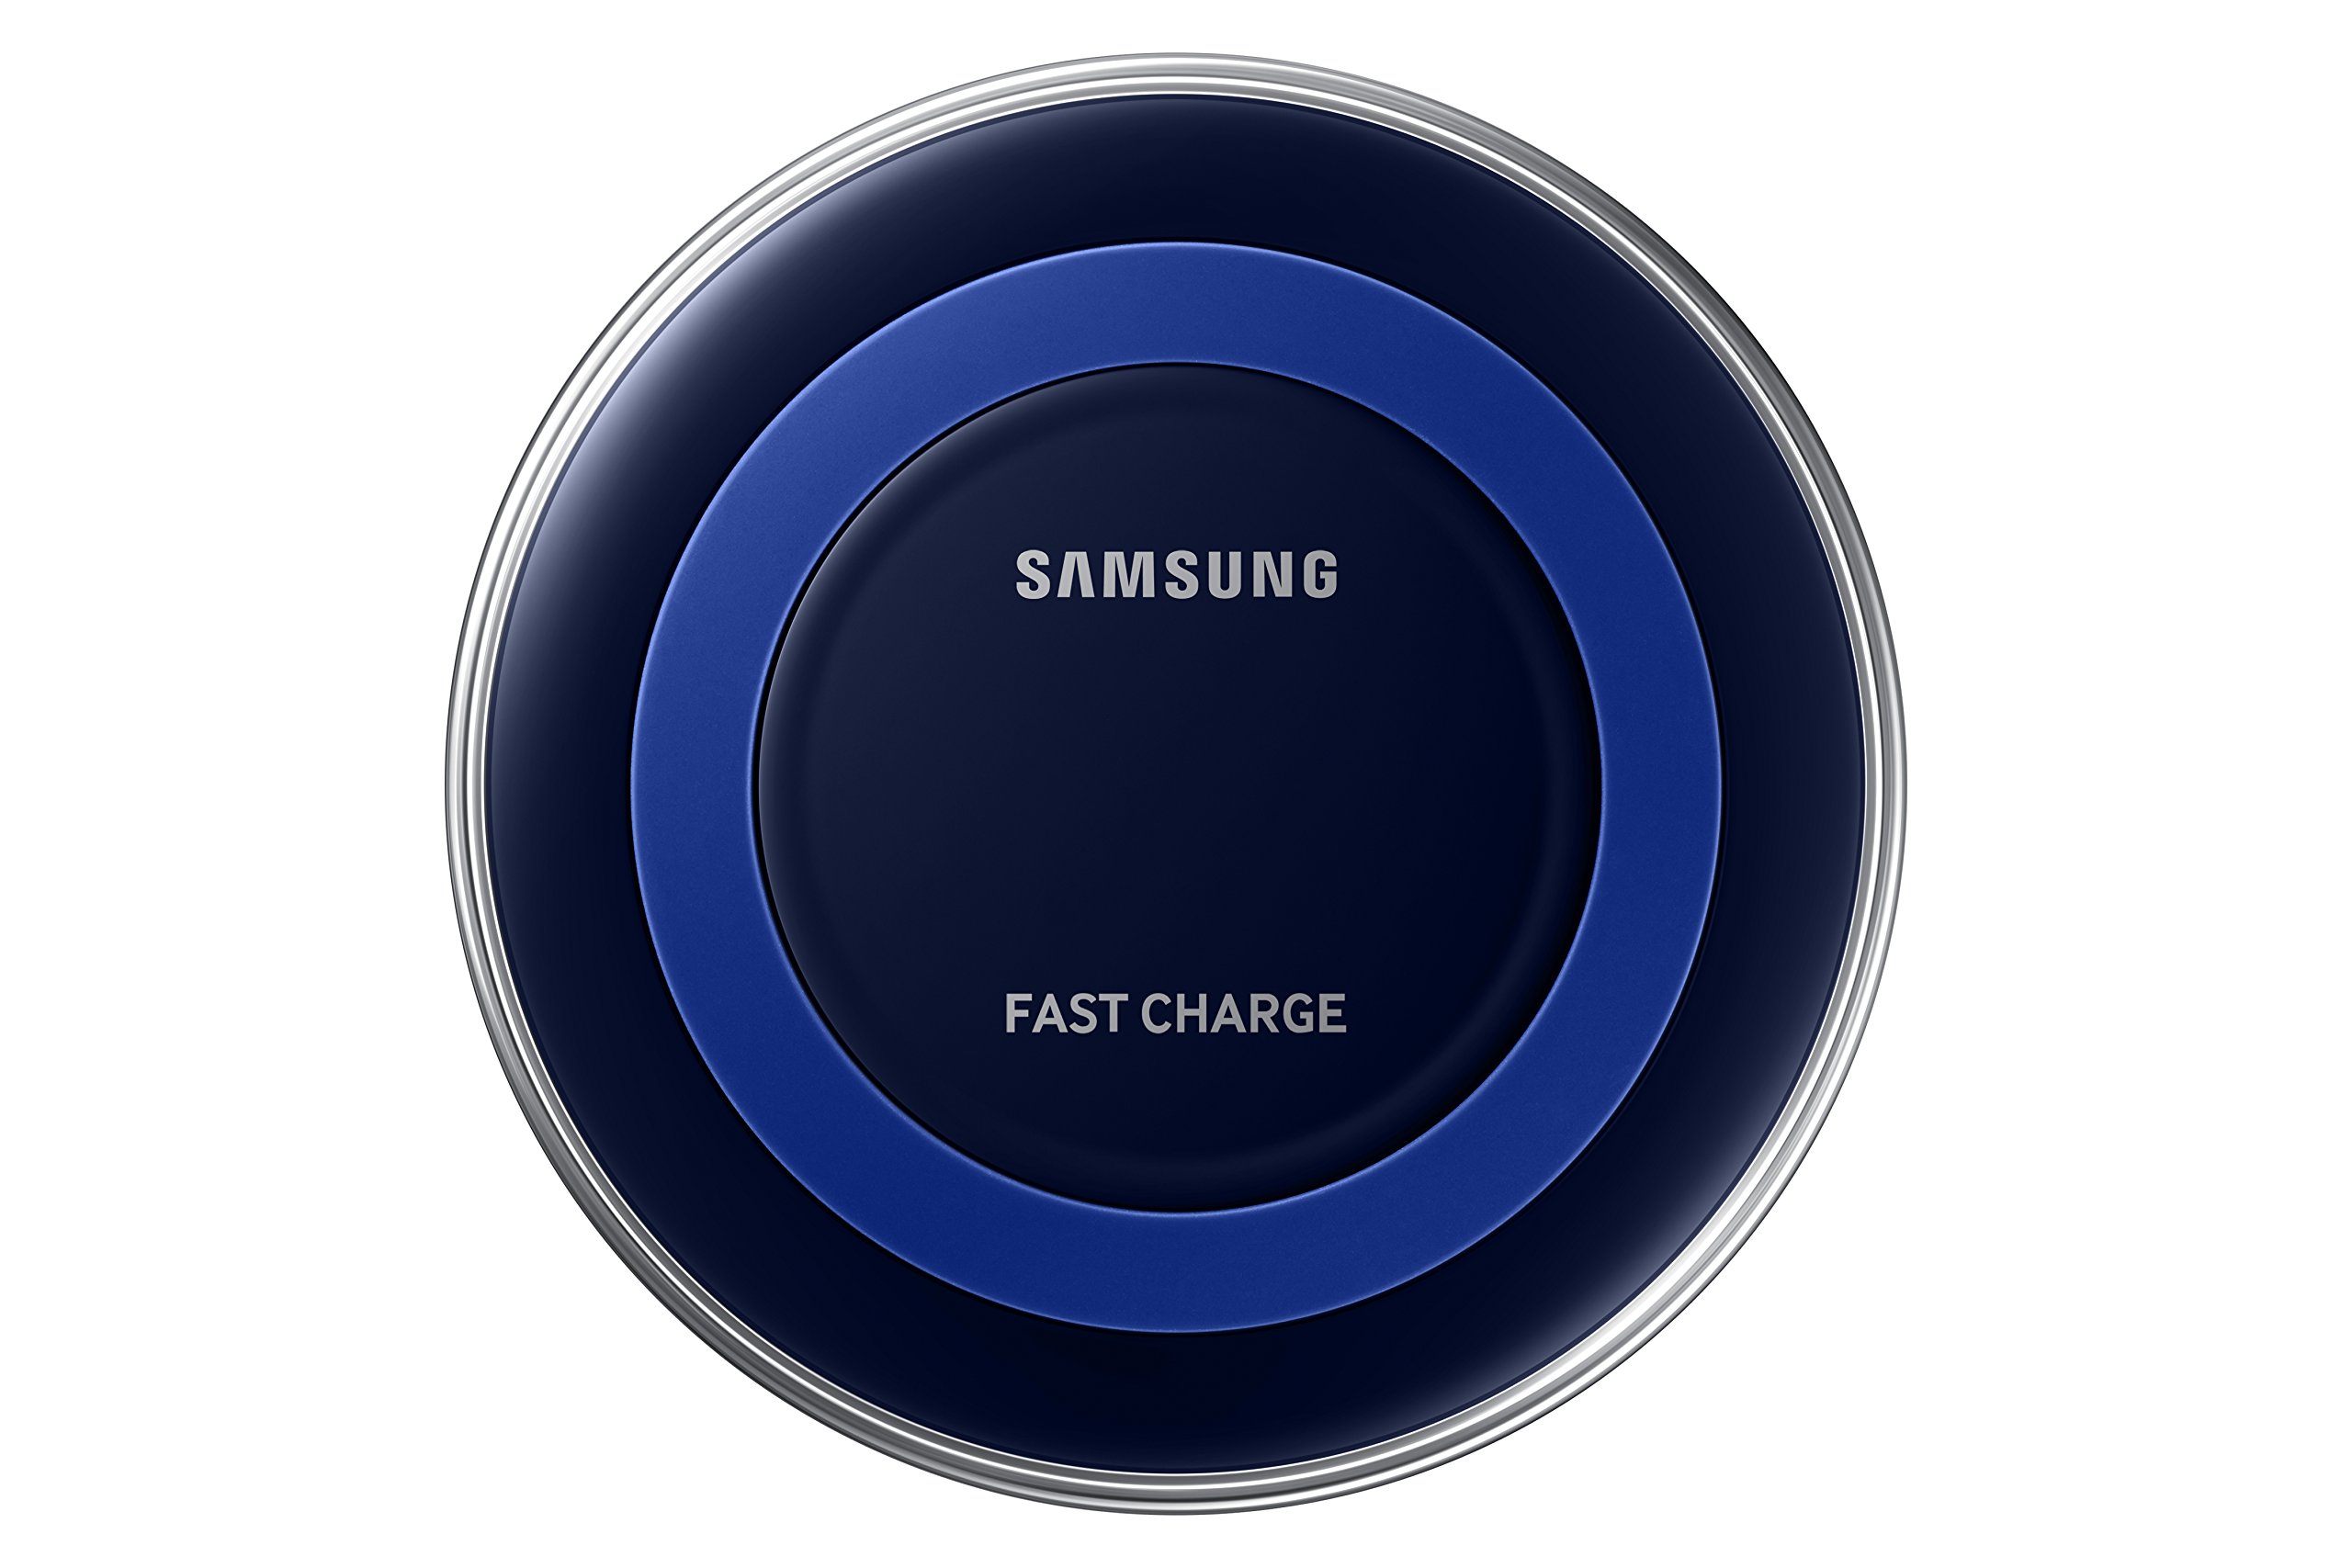 SAMSUNG Qi Certified Fast Charge Wireless Charger Pad (Special Edition) - US Version - Black/Blue